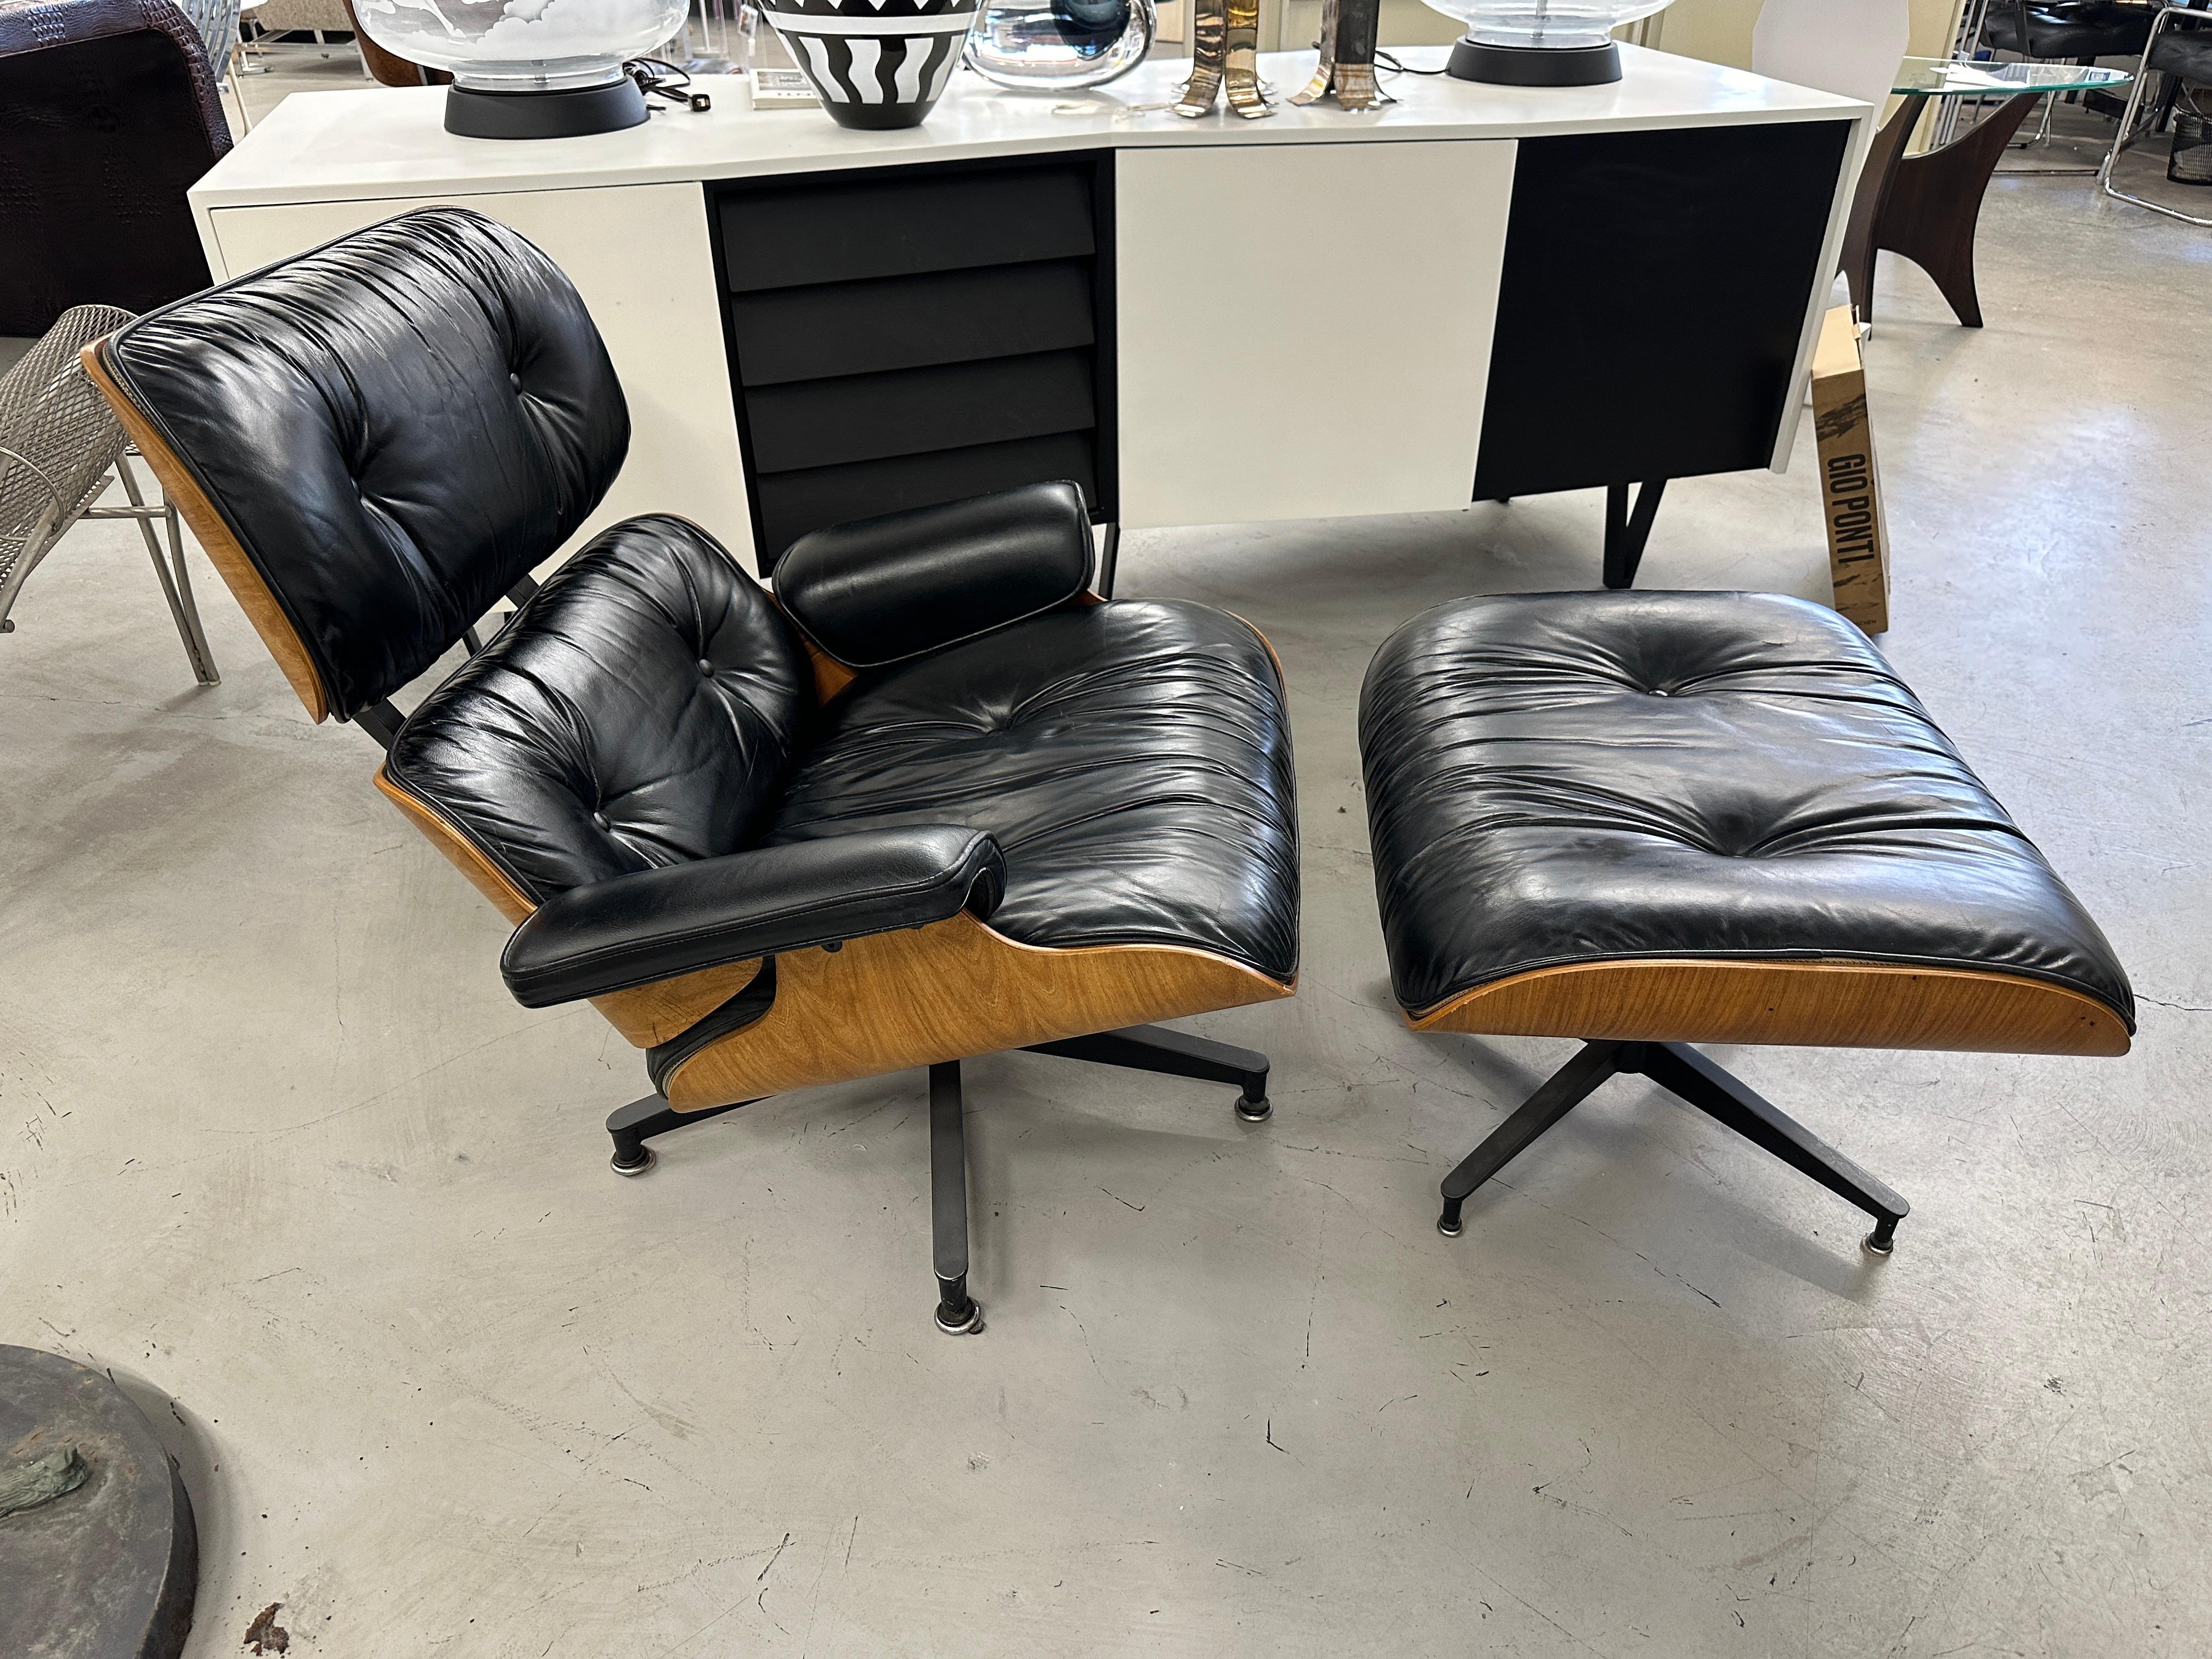 A lovely classic 670/71 Charles and Ray Eames lounge chair and ottoman. Produced by Herman Miller in 1978, the chair and ottoman both have paper labels as well as the Herman Miller label.  This set is from an estate that also had the matching chair